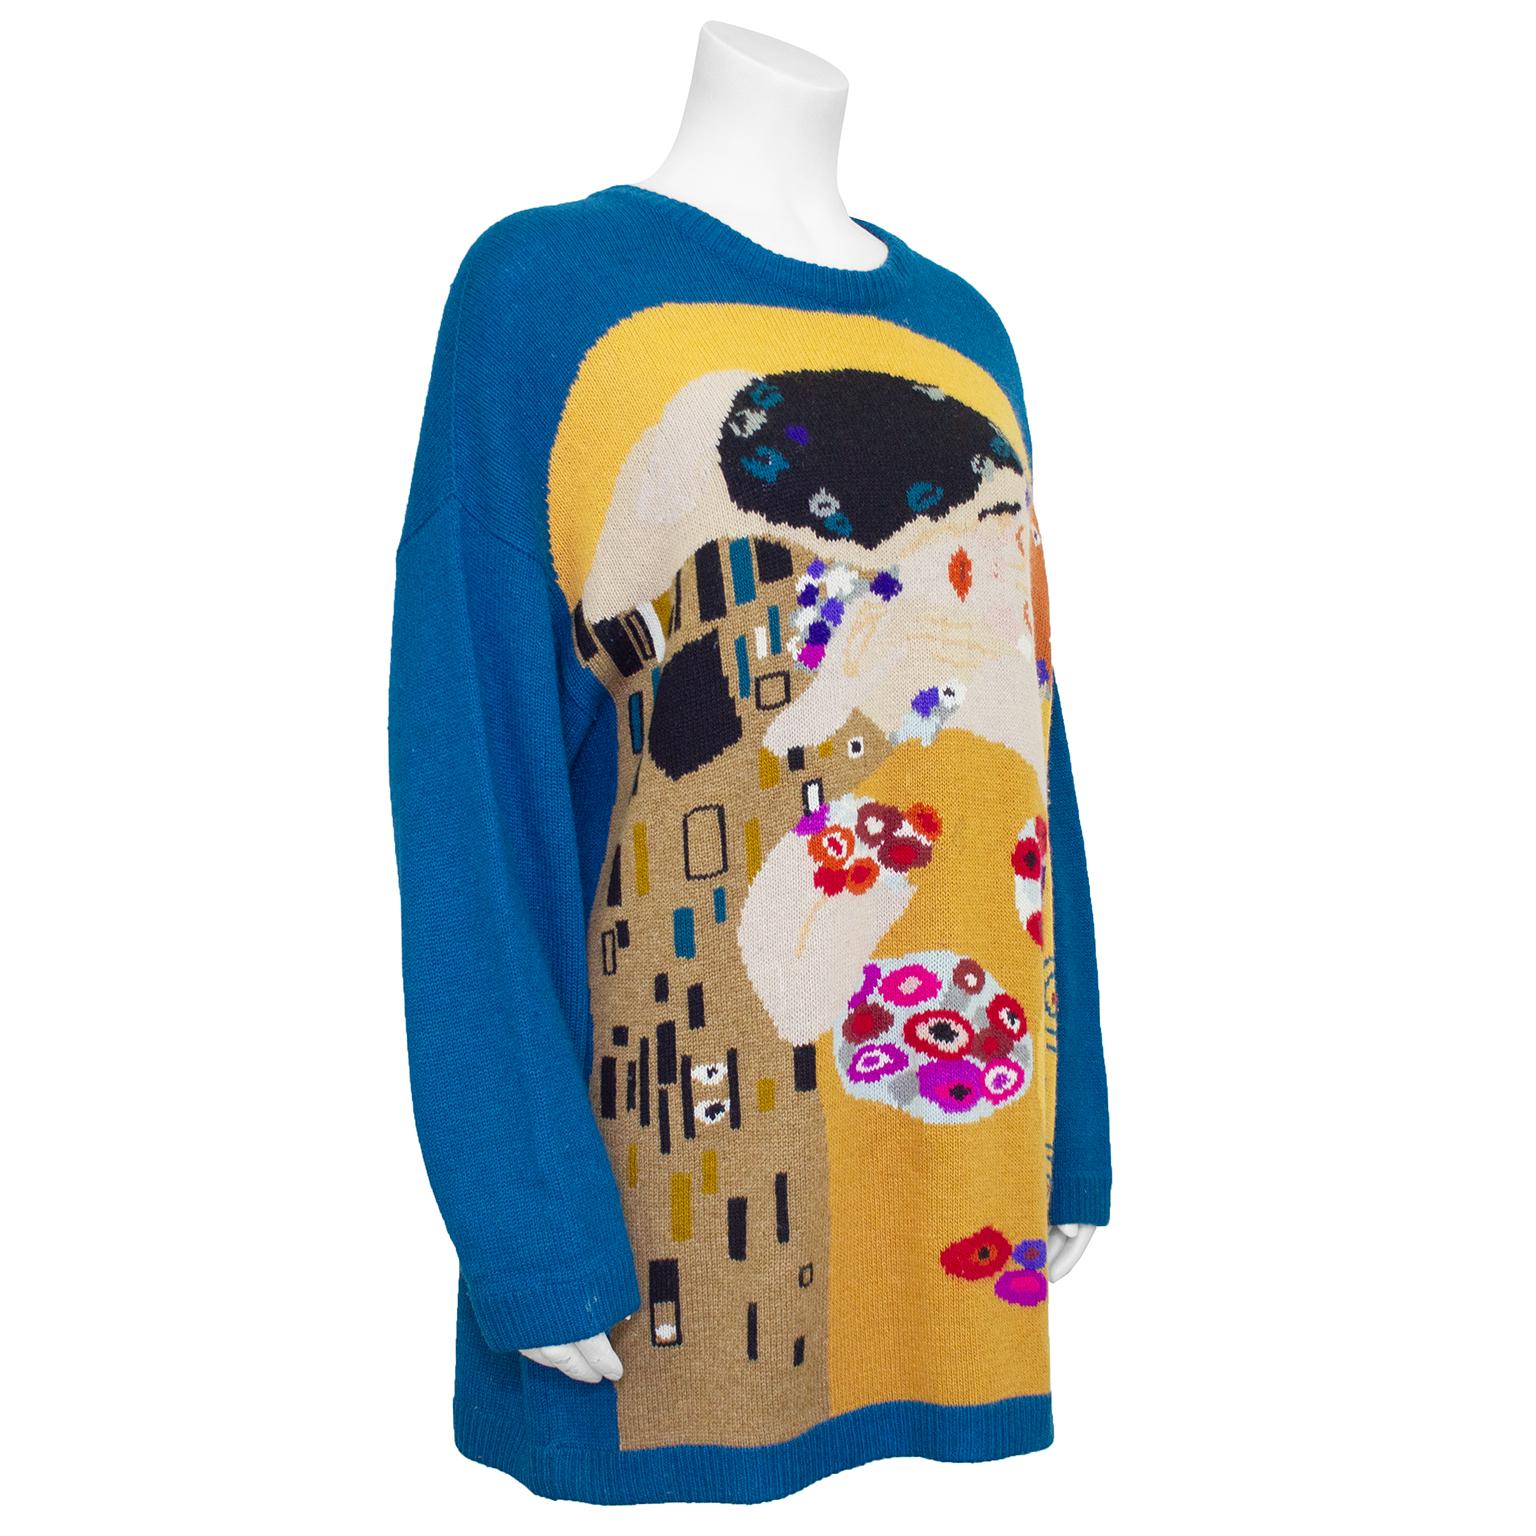 Unique 1980s Krizia knit sweater. Teal blue with large multi colour turn-of-the-century Gustav Klimt inspired illustration on front. Ribbed neckline, cuffs and hem. Slight dolman sleeve. Very visual. 15% wool, 15% cashmere, 15% Angora & 3% nylon.